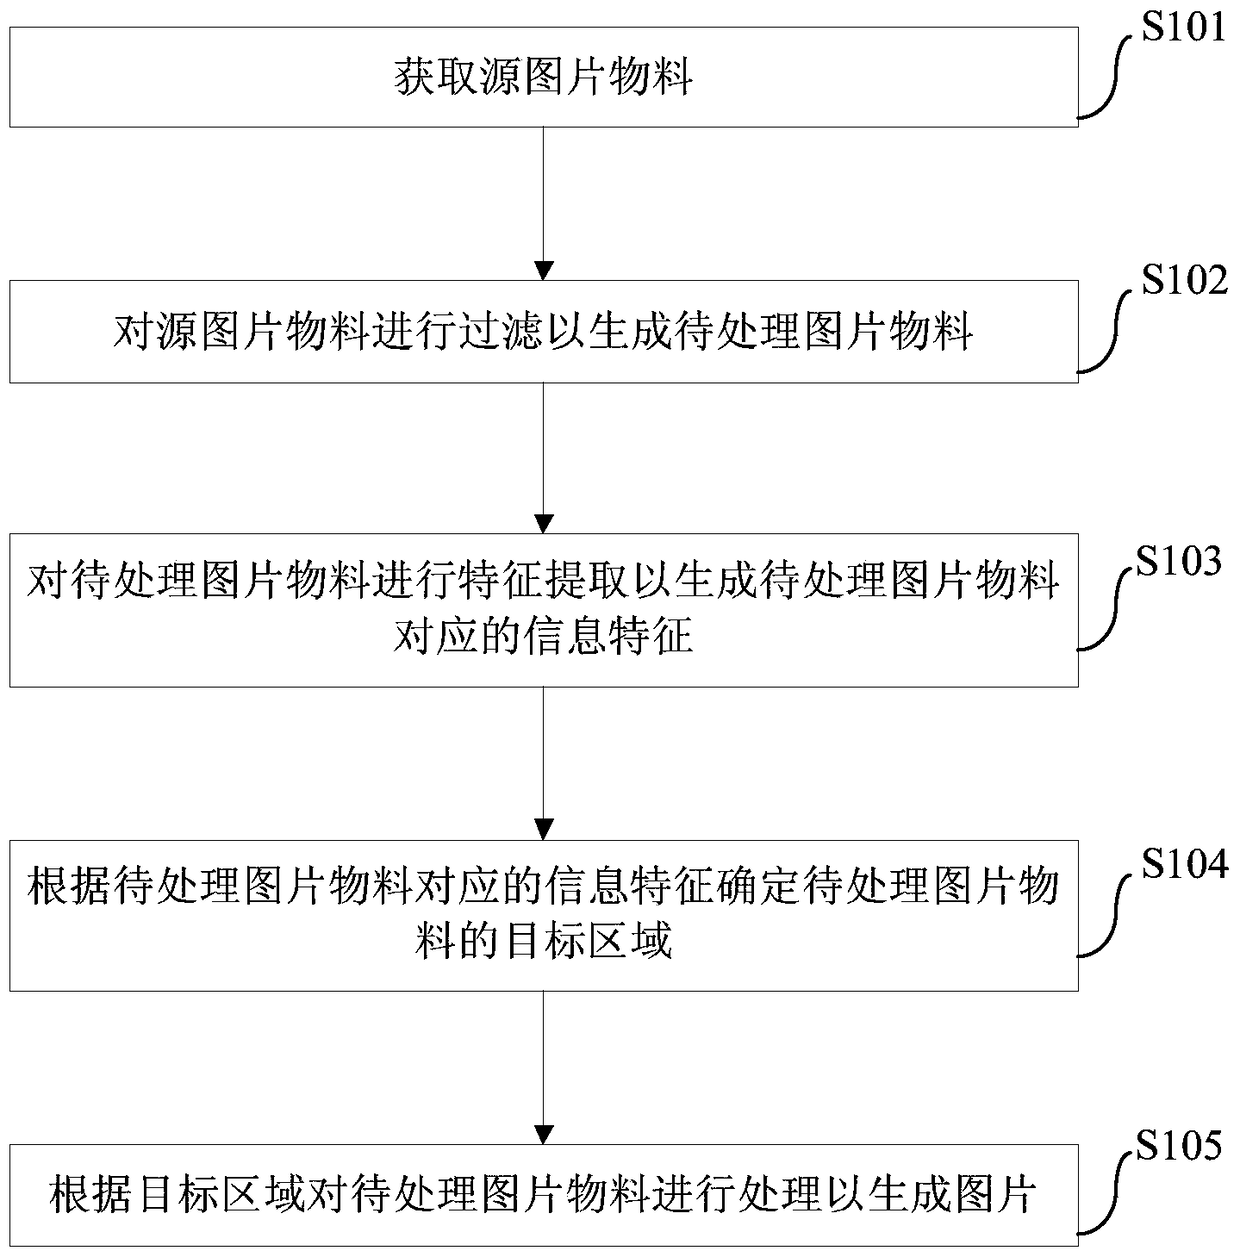 Image material processing method, device and search engine for search engine